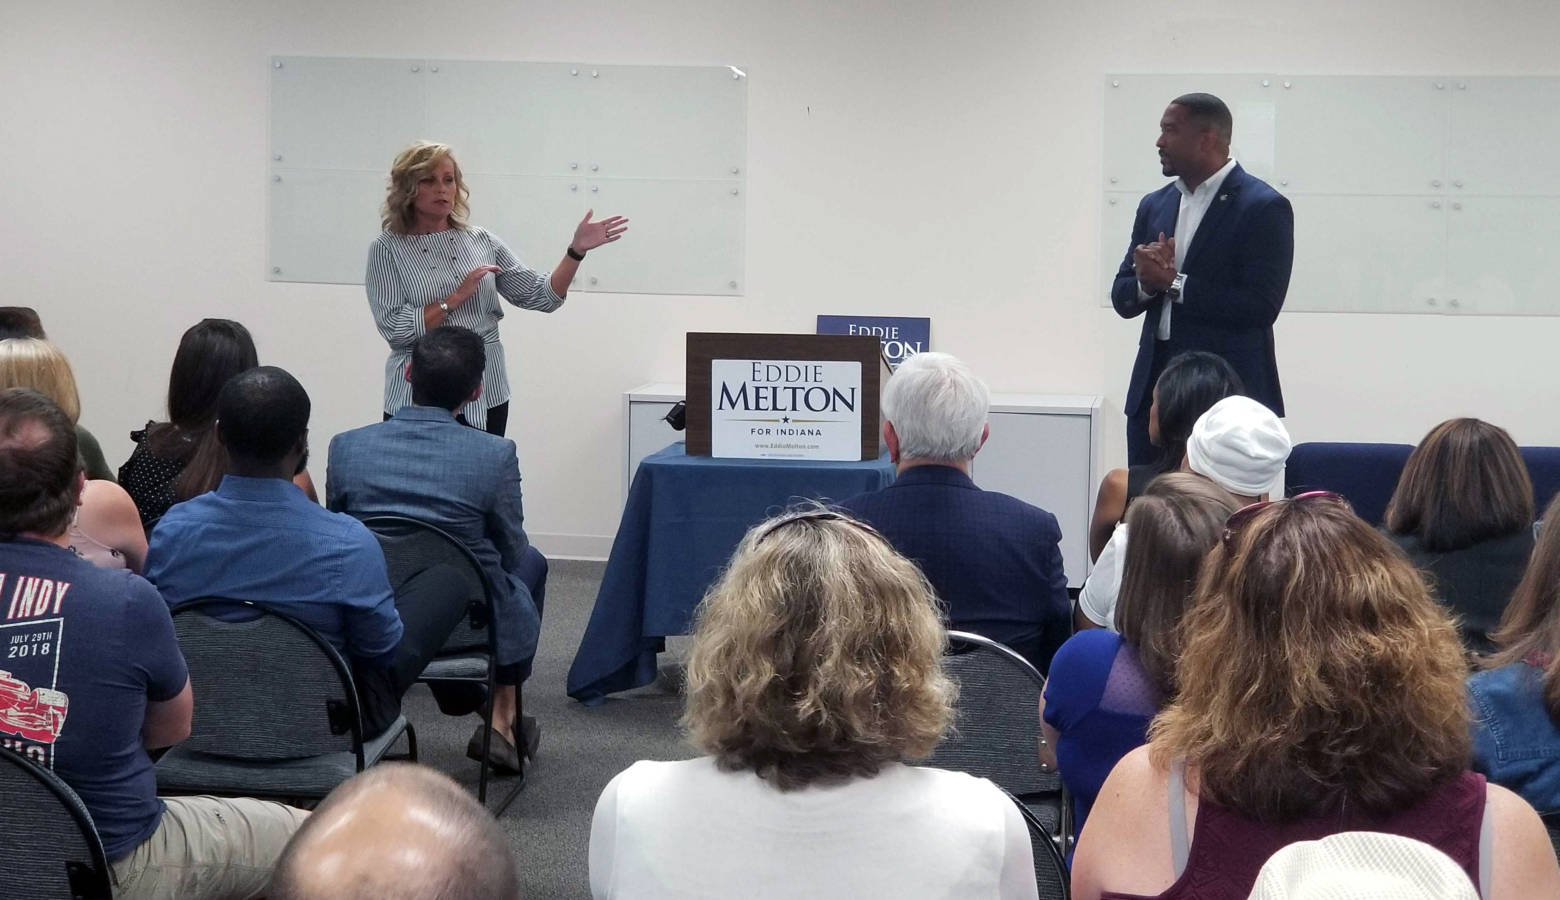 State Superintendent of Public Instruction Jennifer McCormick and Sen. Eddie Melton (D-Gary) give opening remarks at the first stop on their statewide listening tour. (Jeanie Lindsay/IPB News)